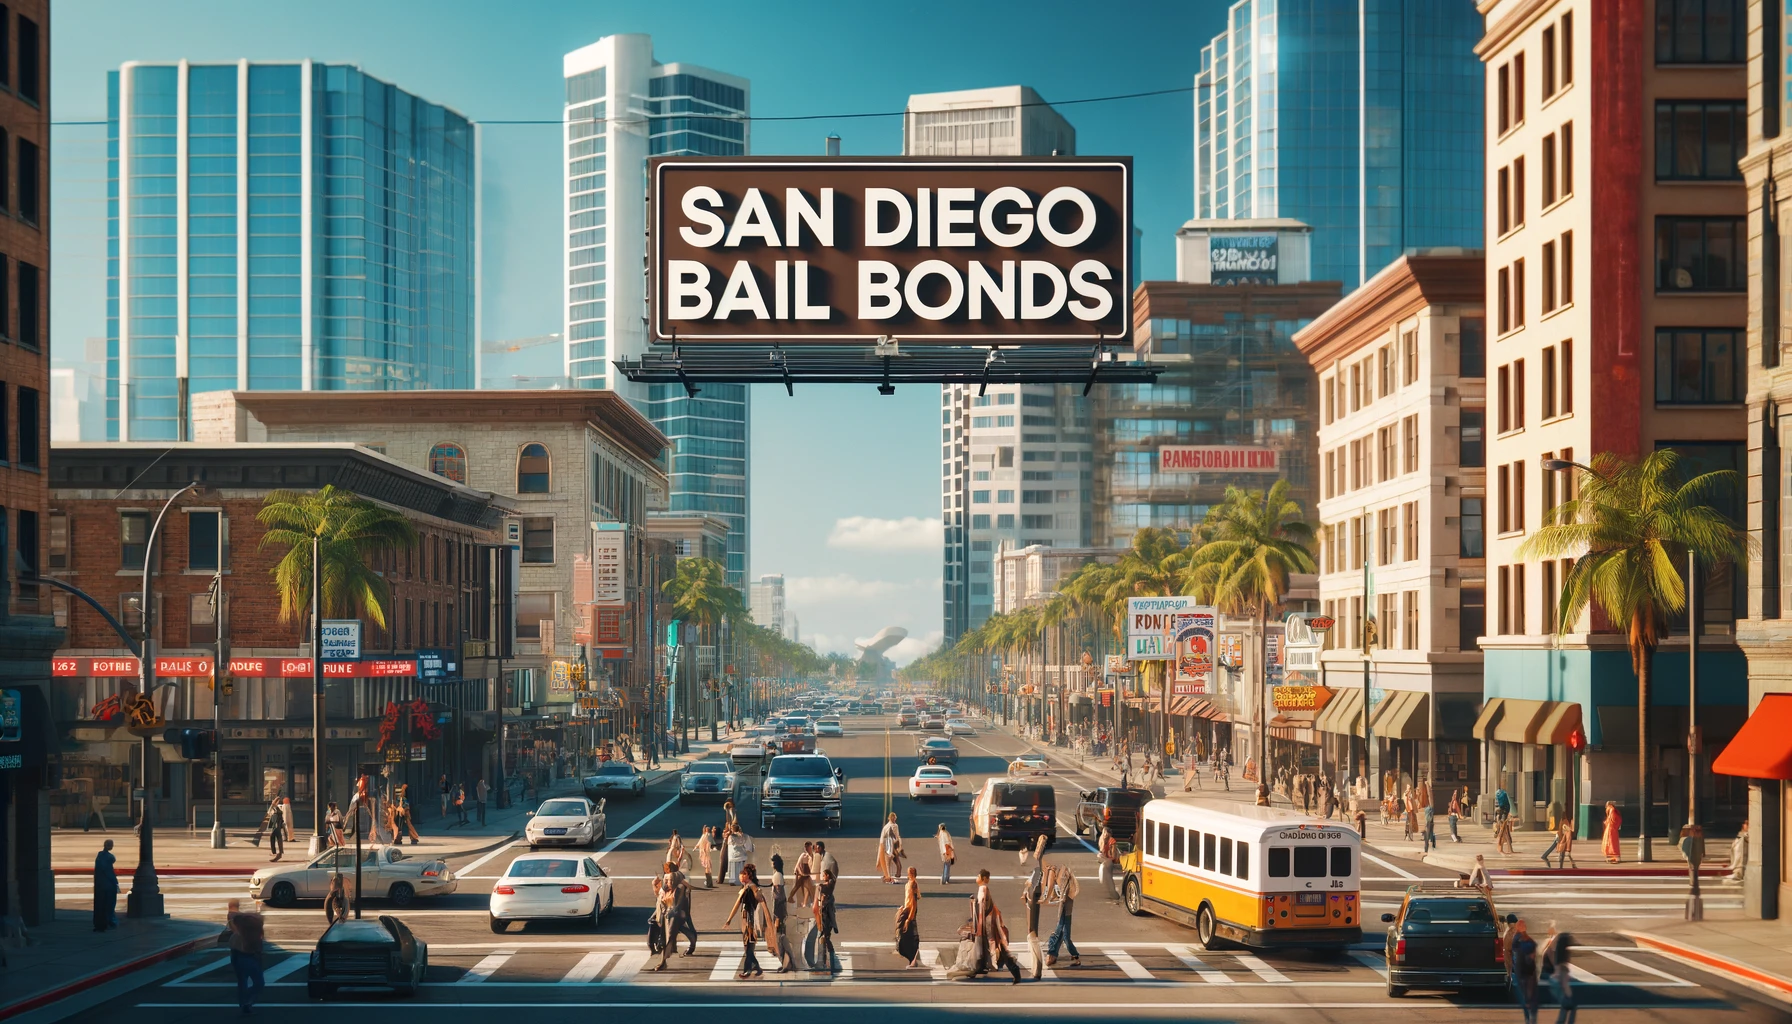 an Diego Bail Bonds' sign among a vibrant scene with diverse pedestrians and vehicles, set against modern buildings and palm trees under a clear blue sky